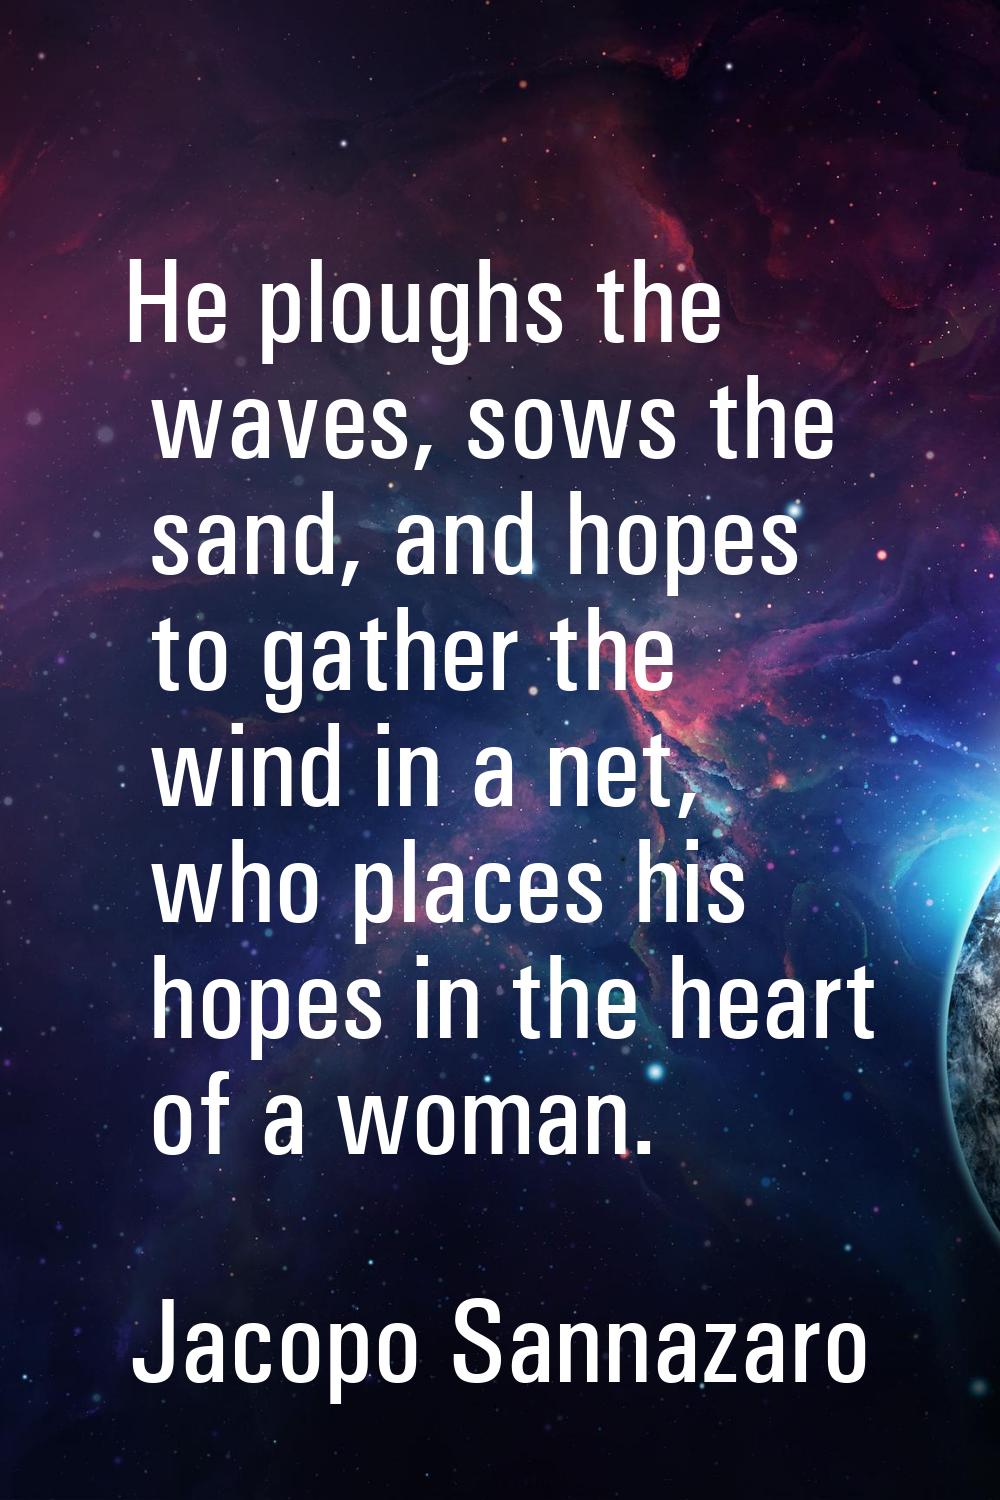 He ploughs the waves, sows the sand, and hopes to gather the wind in a net, who places his hopes in